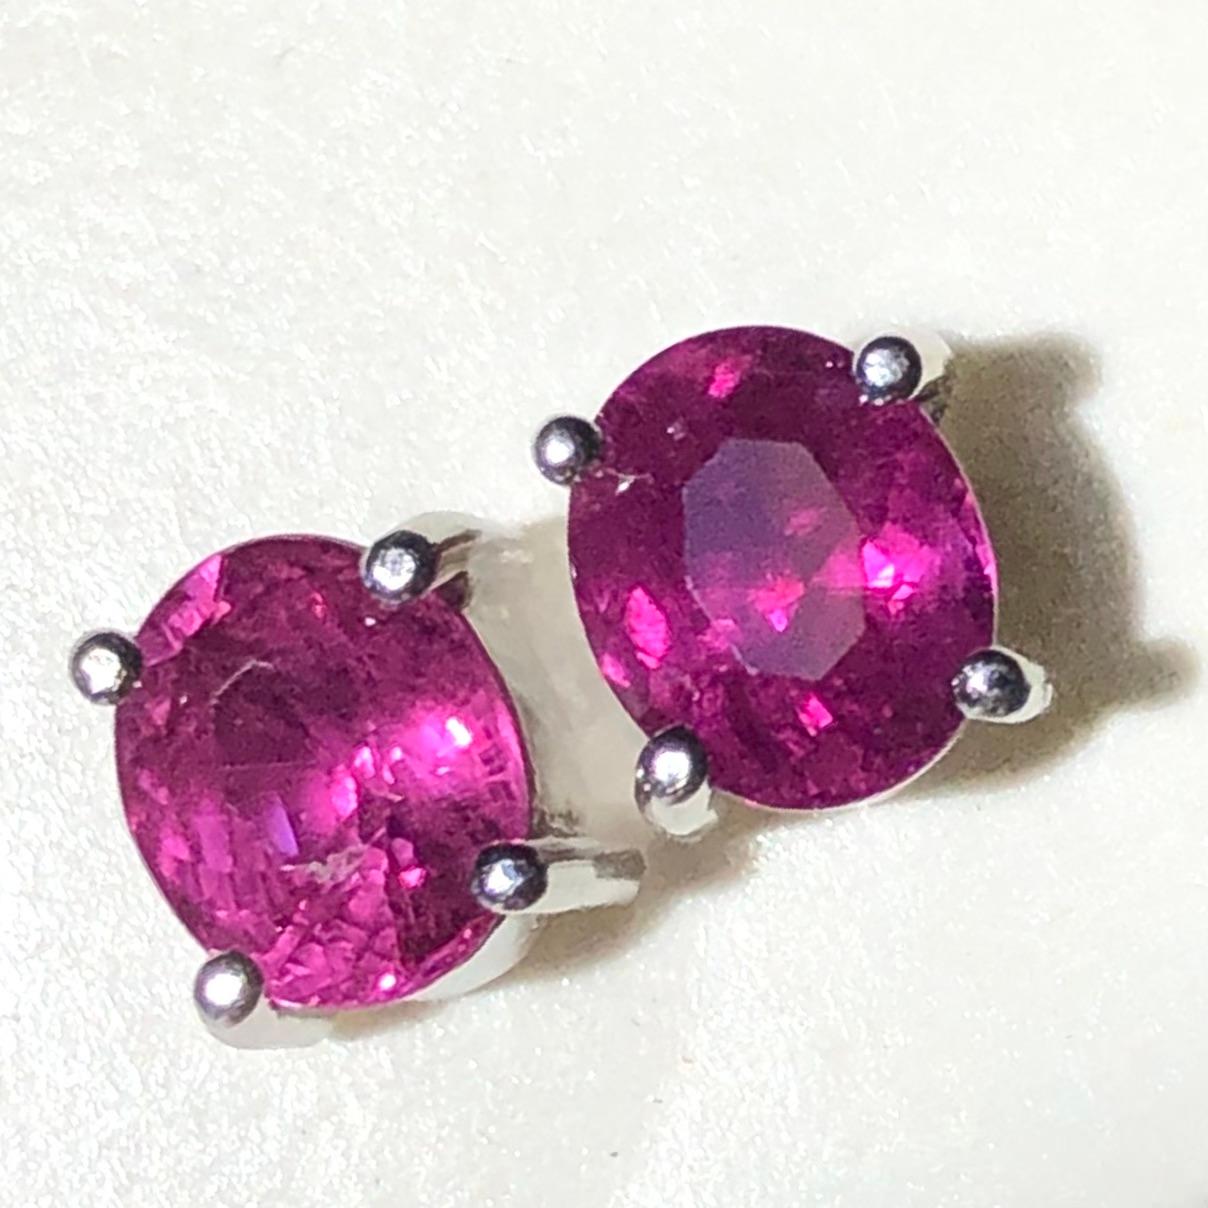 ESTATE 18K WHITE GOLD EARRINGS. OVAL AAA RUBIES ARE 2.00 CARATS.

A classic pair of stud earrings showcasing pinkish red rubies oval cut untreated weigh 2.00 carats total. Made in 18 karats white gold.
Condition: Estate/ Excellent condition